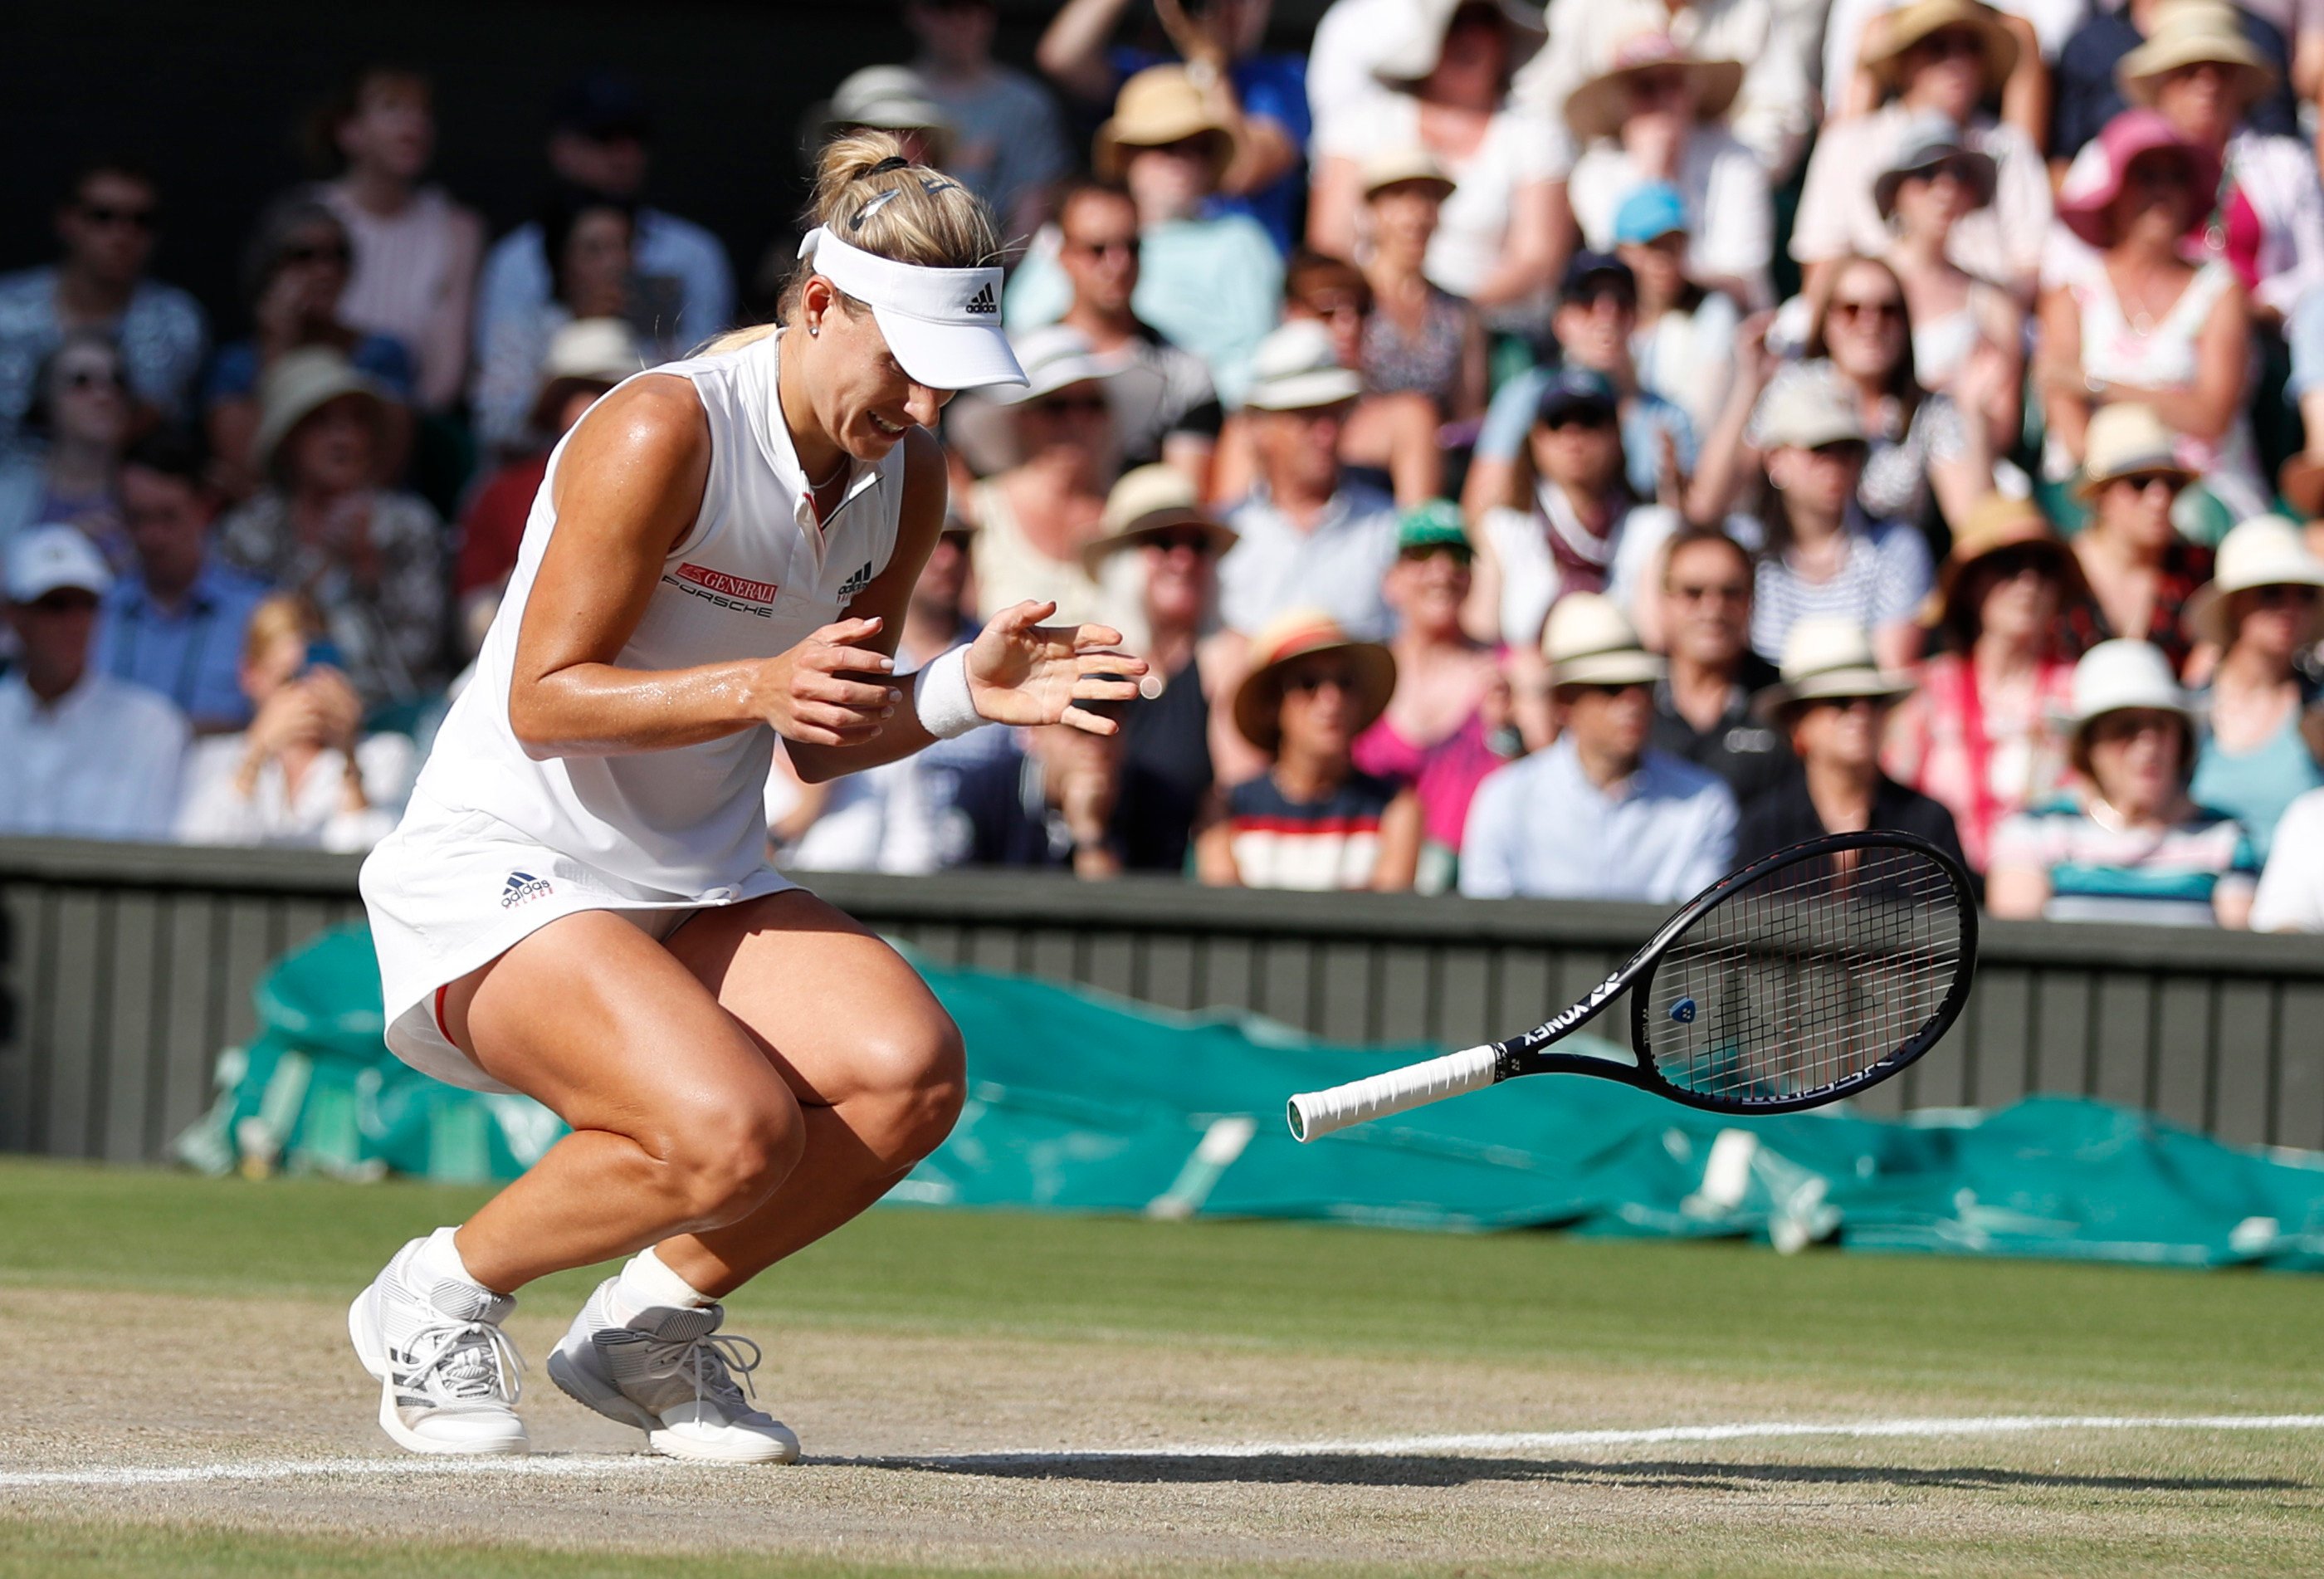 Angelique Kerber of Germany defeated Serena Williams of the US to win the Wimbledon singles title in 2018 after finishing finished runner-up in 2016. Photo: AP